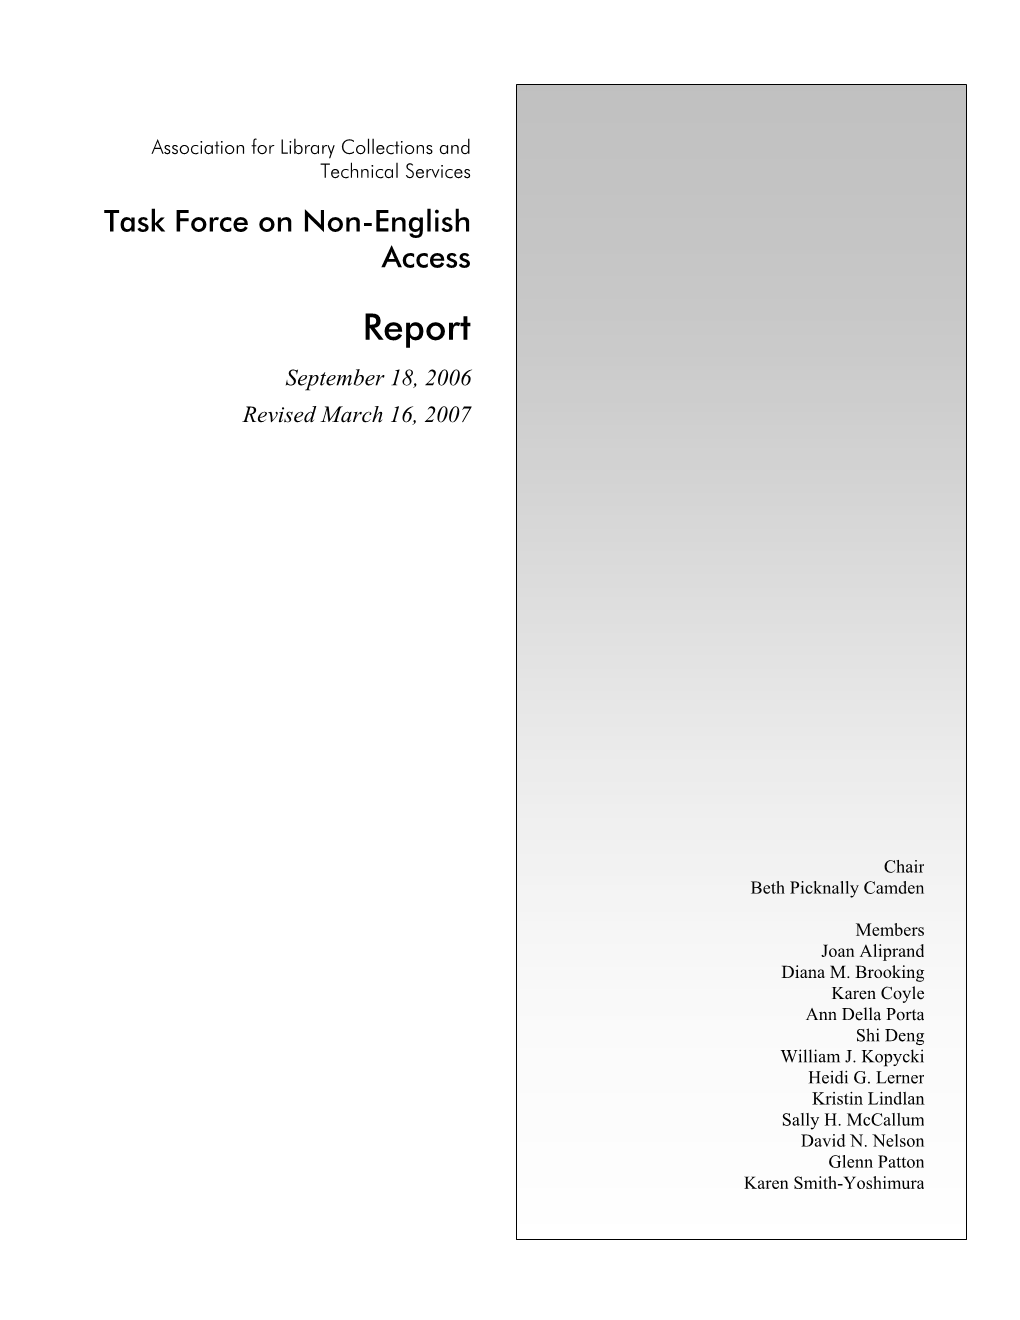 Task Force on Non-English Access: Report